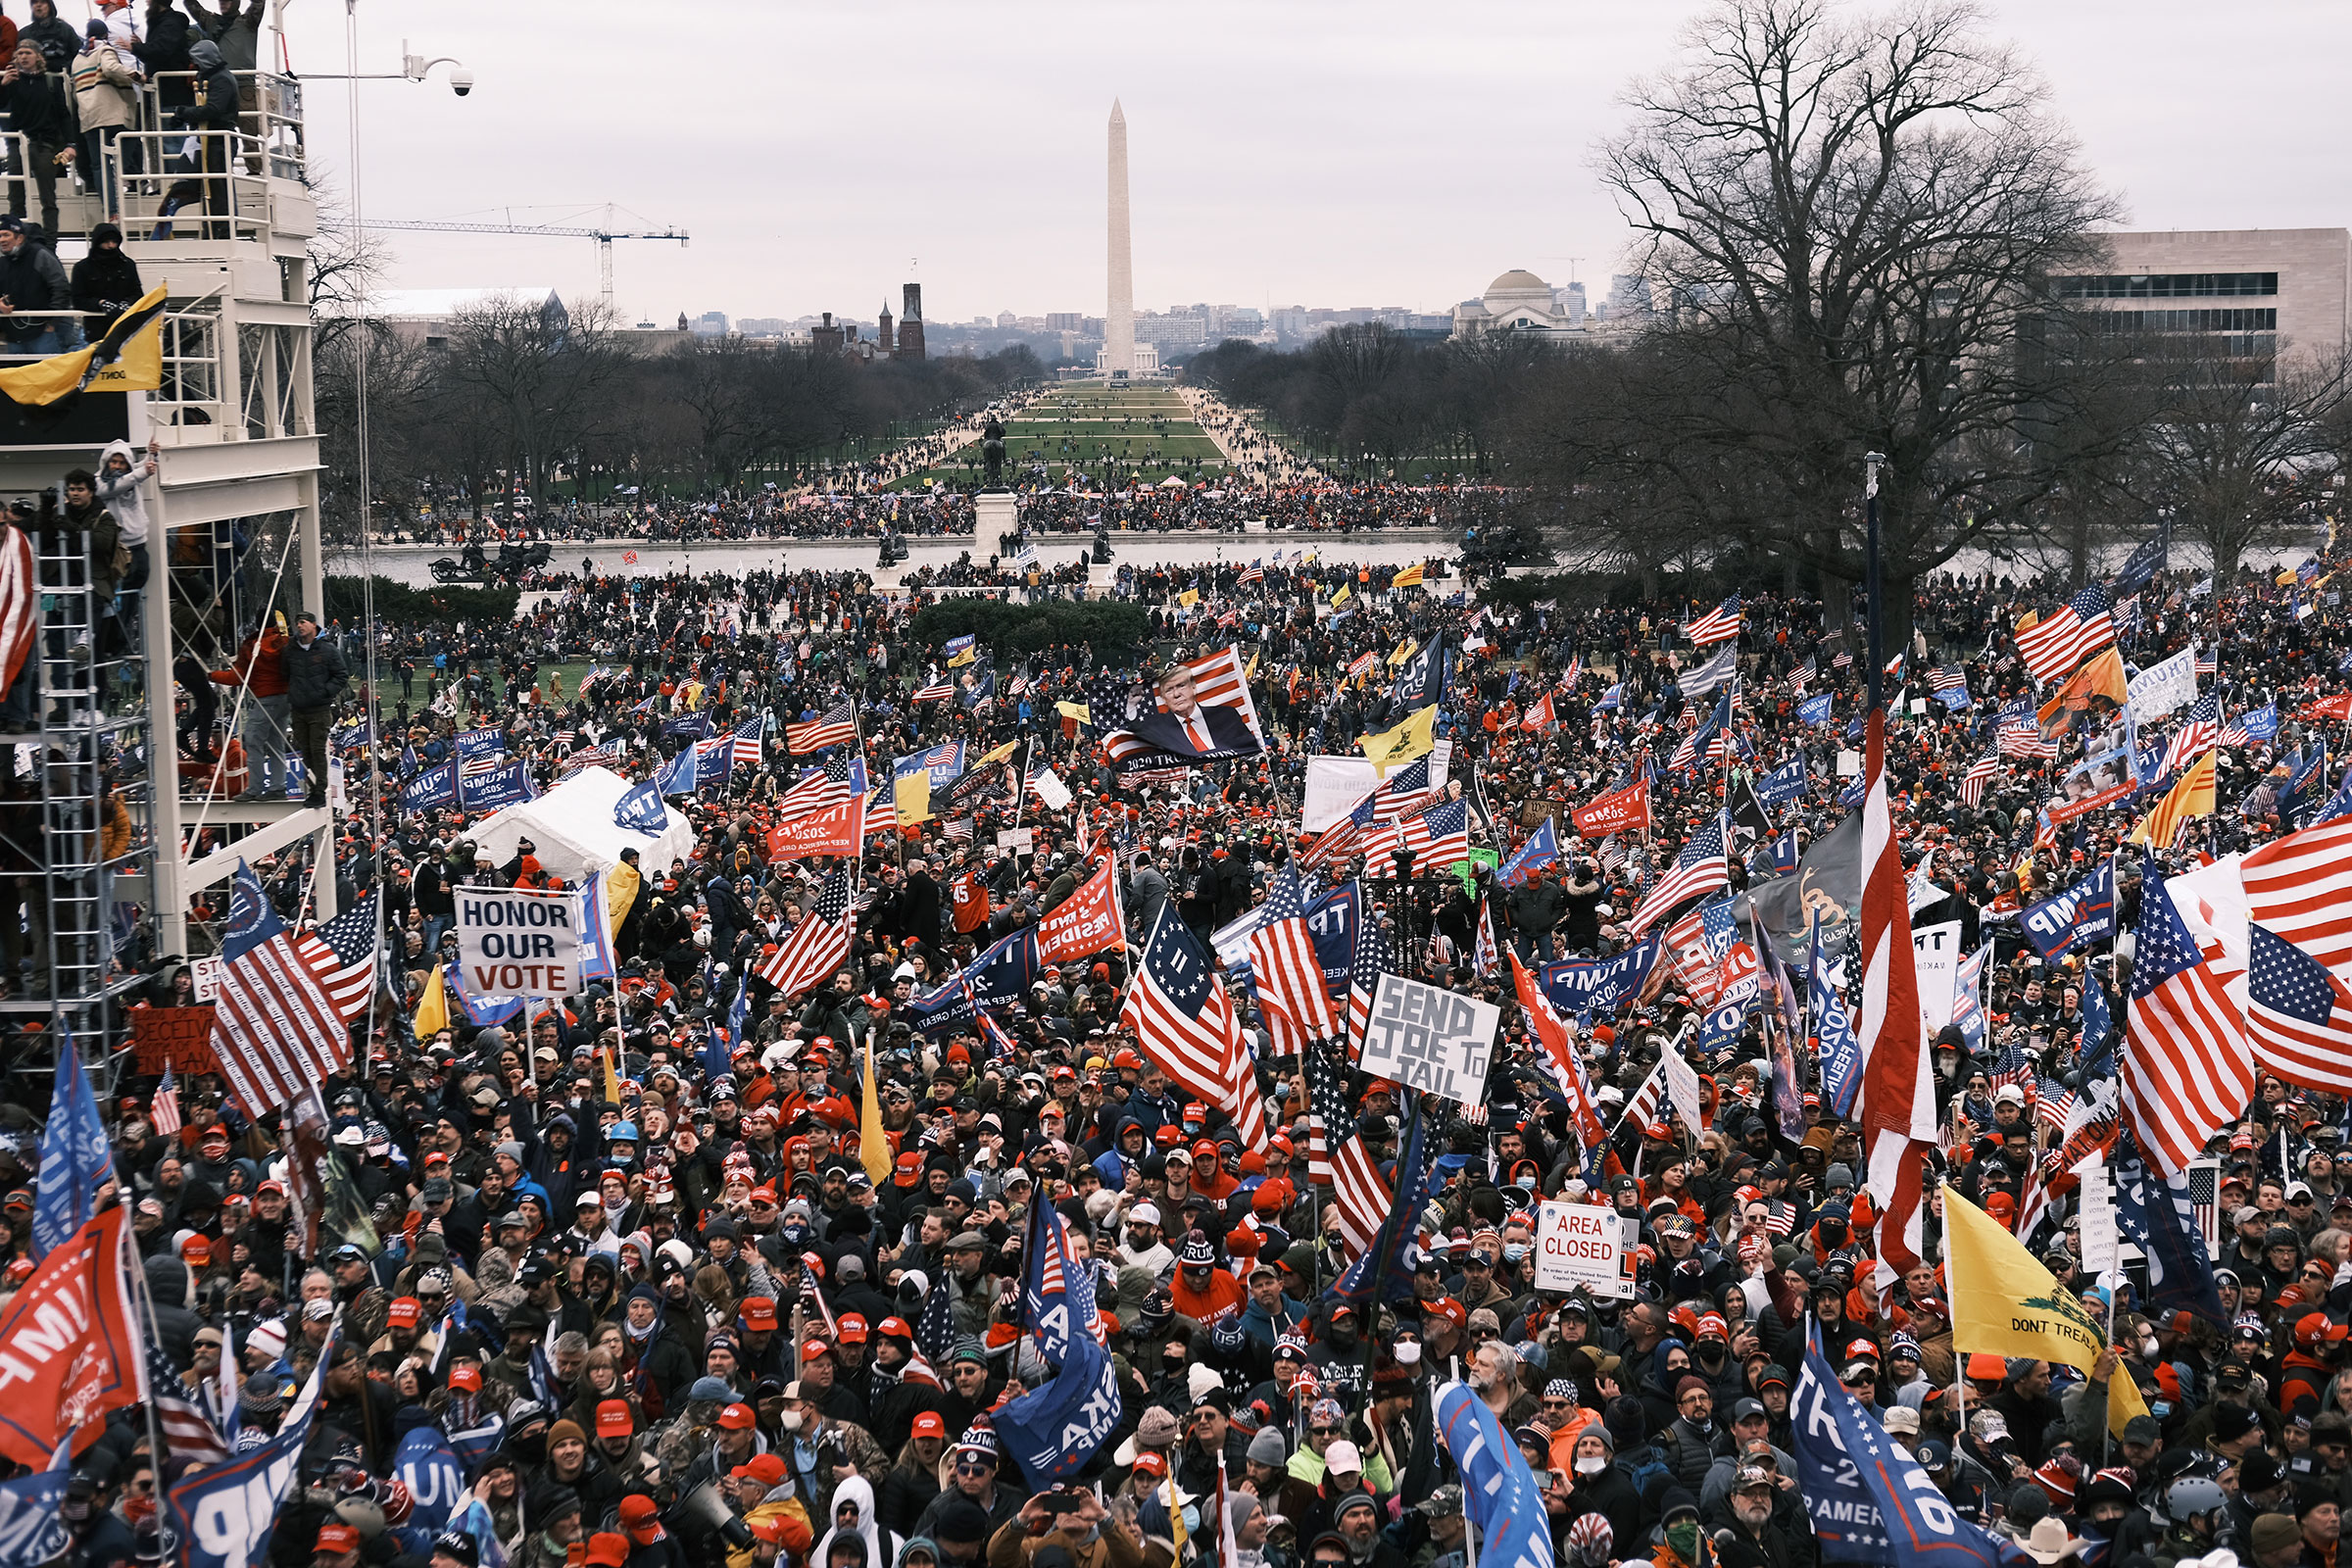 Trump supporters gather outside the Capitol building following the "Stop the Steal" rally in Washington on Jan. 6, 2021. (Spencer Platt—Getty Images)